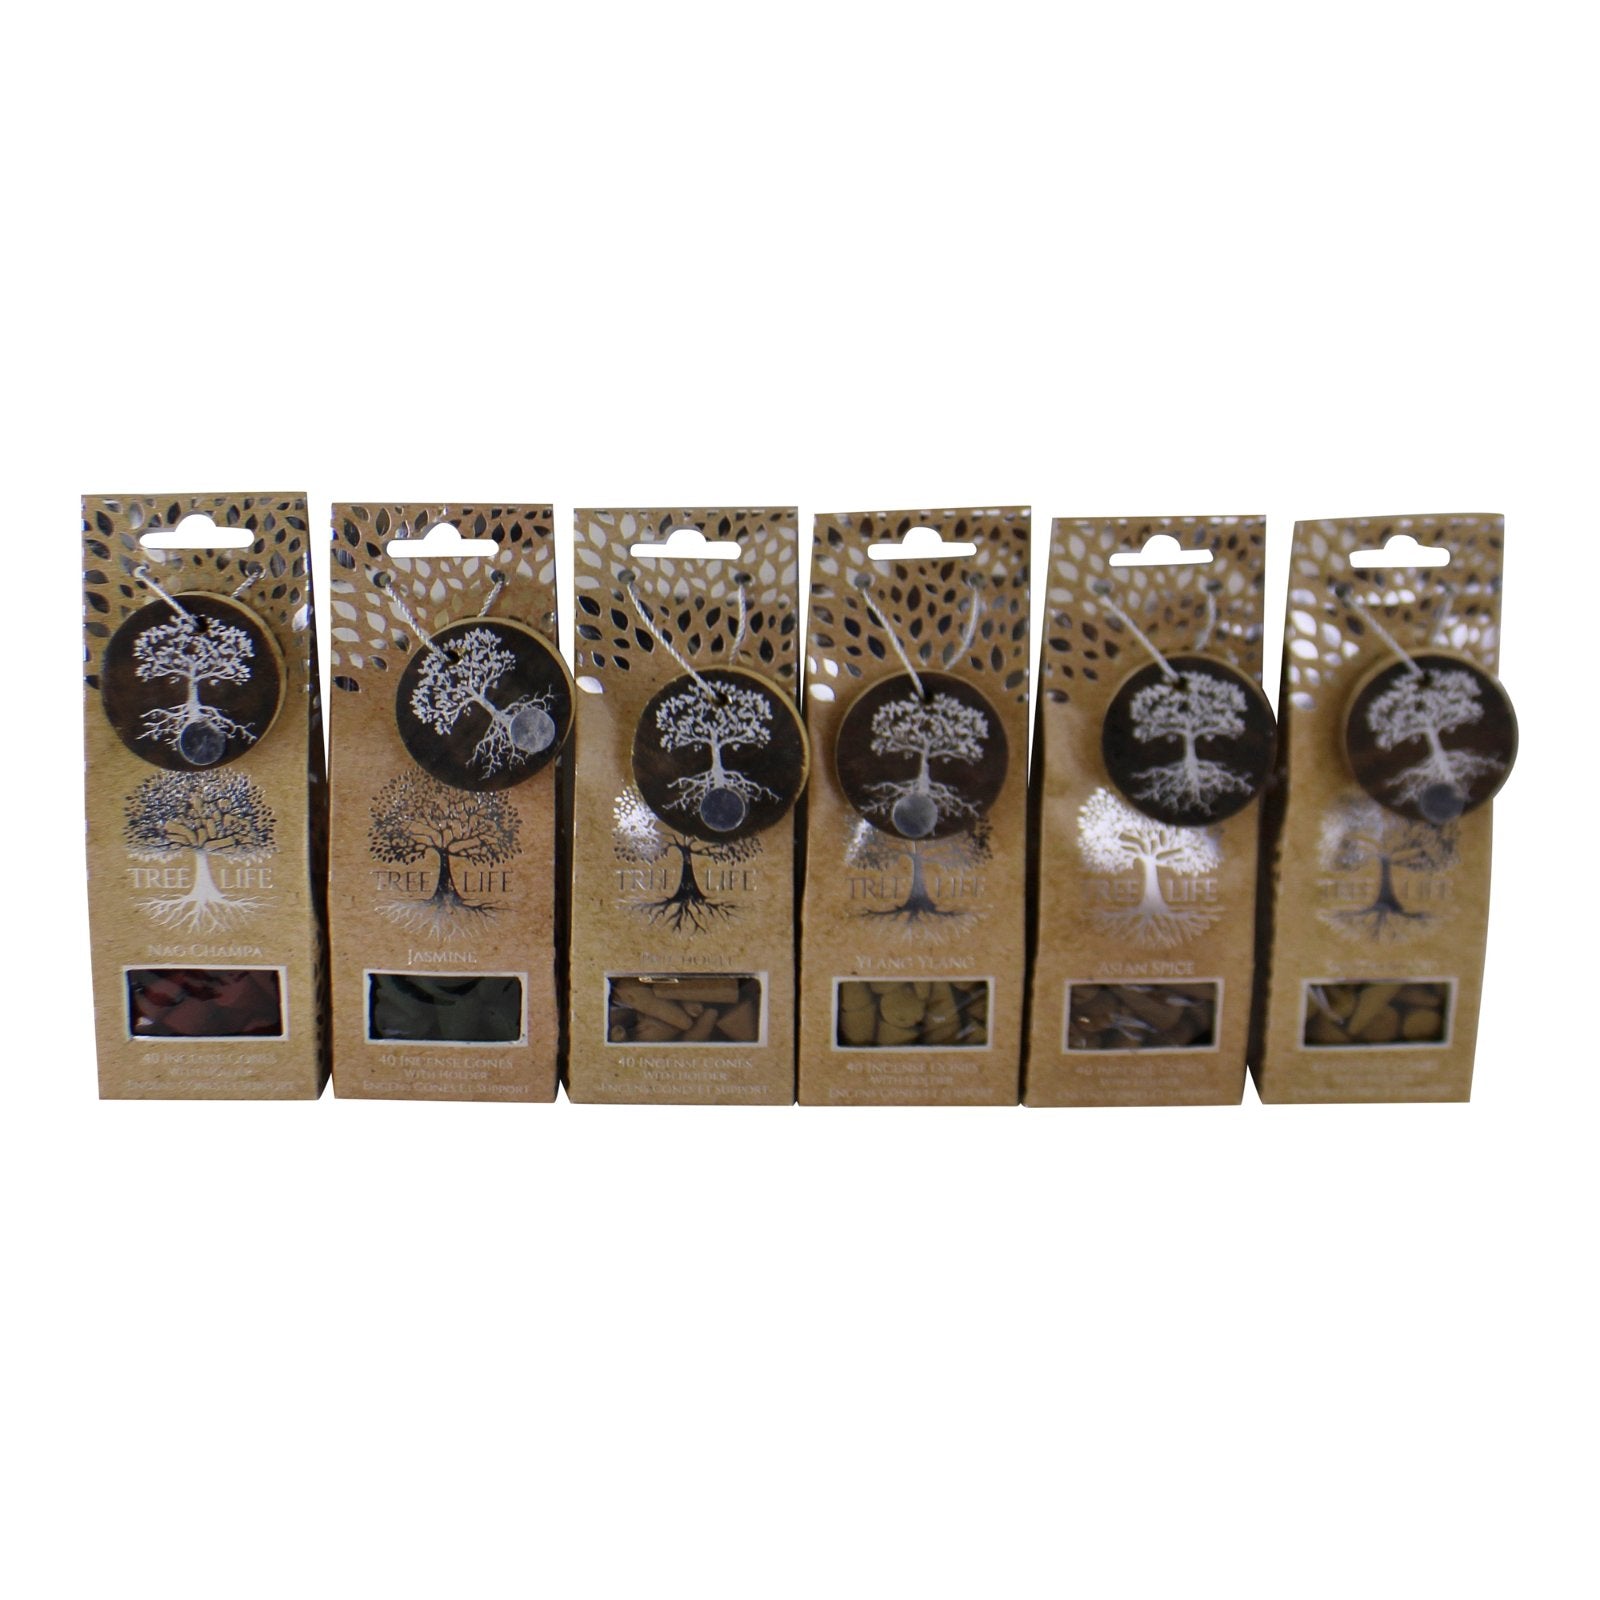 Set of 6 Fragranced Incense Cones With Holders, Tree Of Life Design